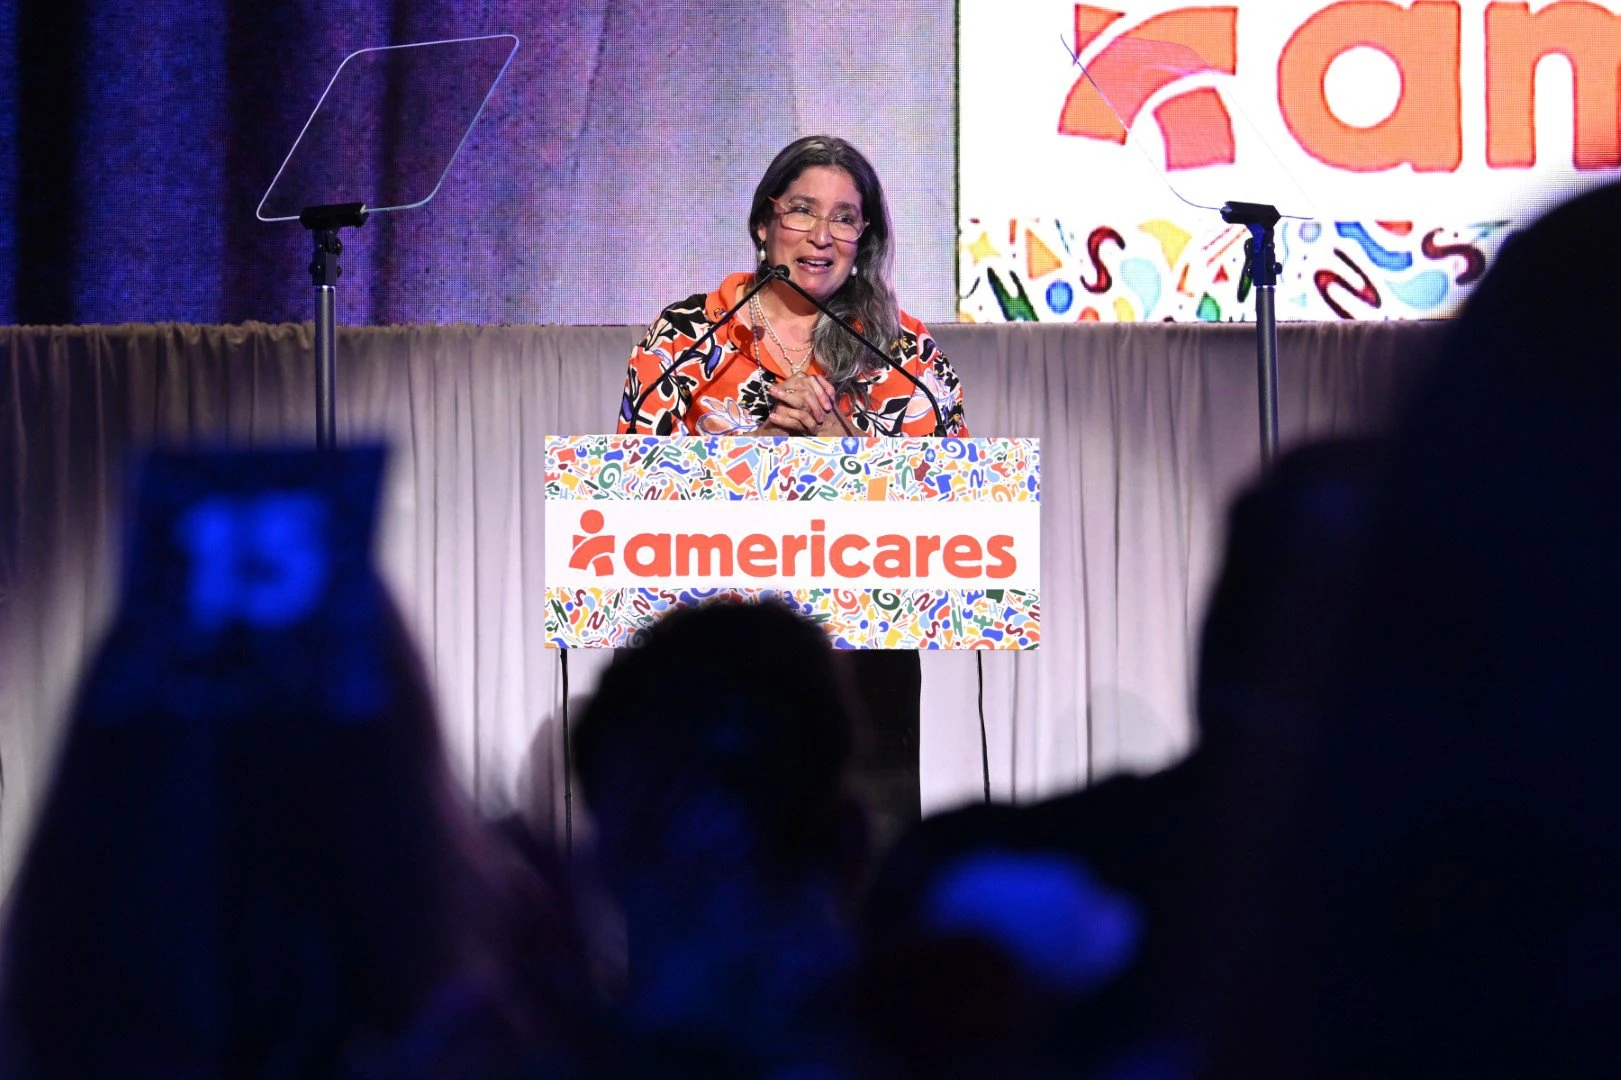 Americares Senior Director of Latin America and Caribbean Programs Dr. Brenda Rivera-García speaks onstage at the 2022 Americares Airlift Benefit at Westchester County Airport on October 1, 2022 in Harrison, New York. Photo by Bryan Bedder/Getty Images for Americares.